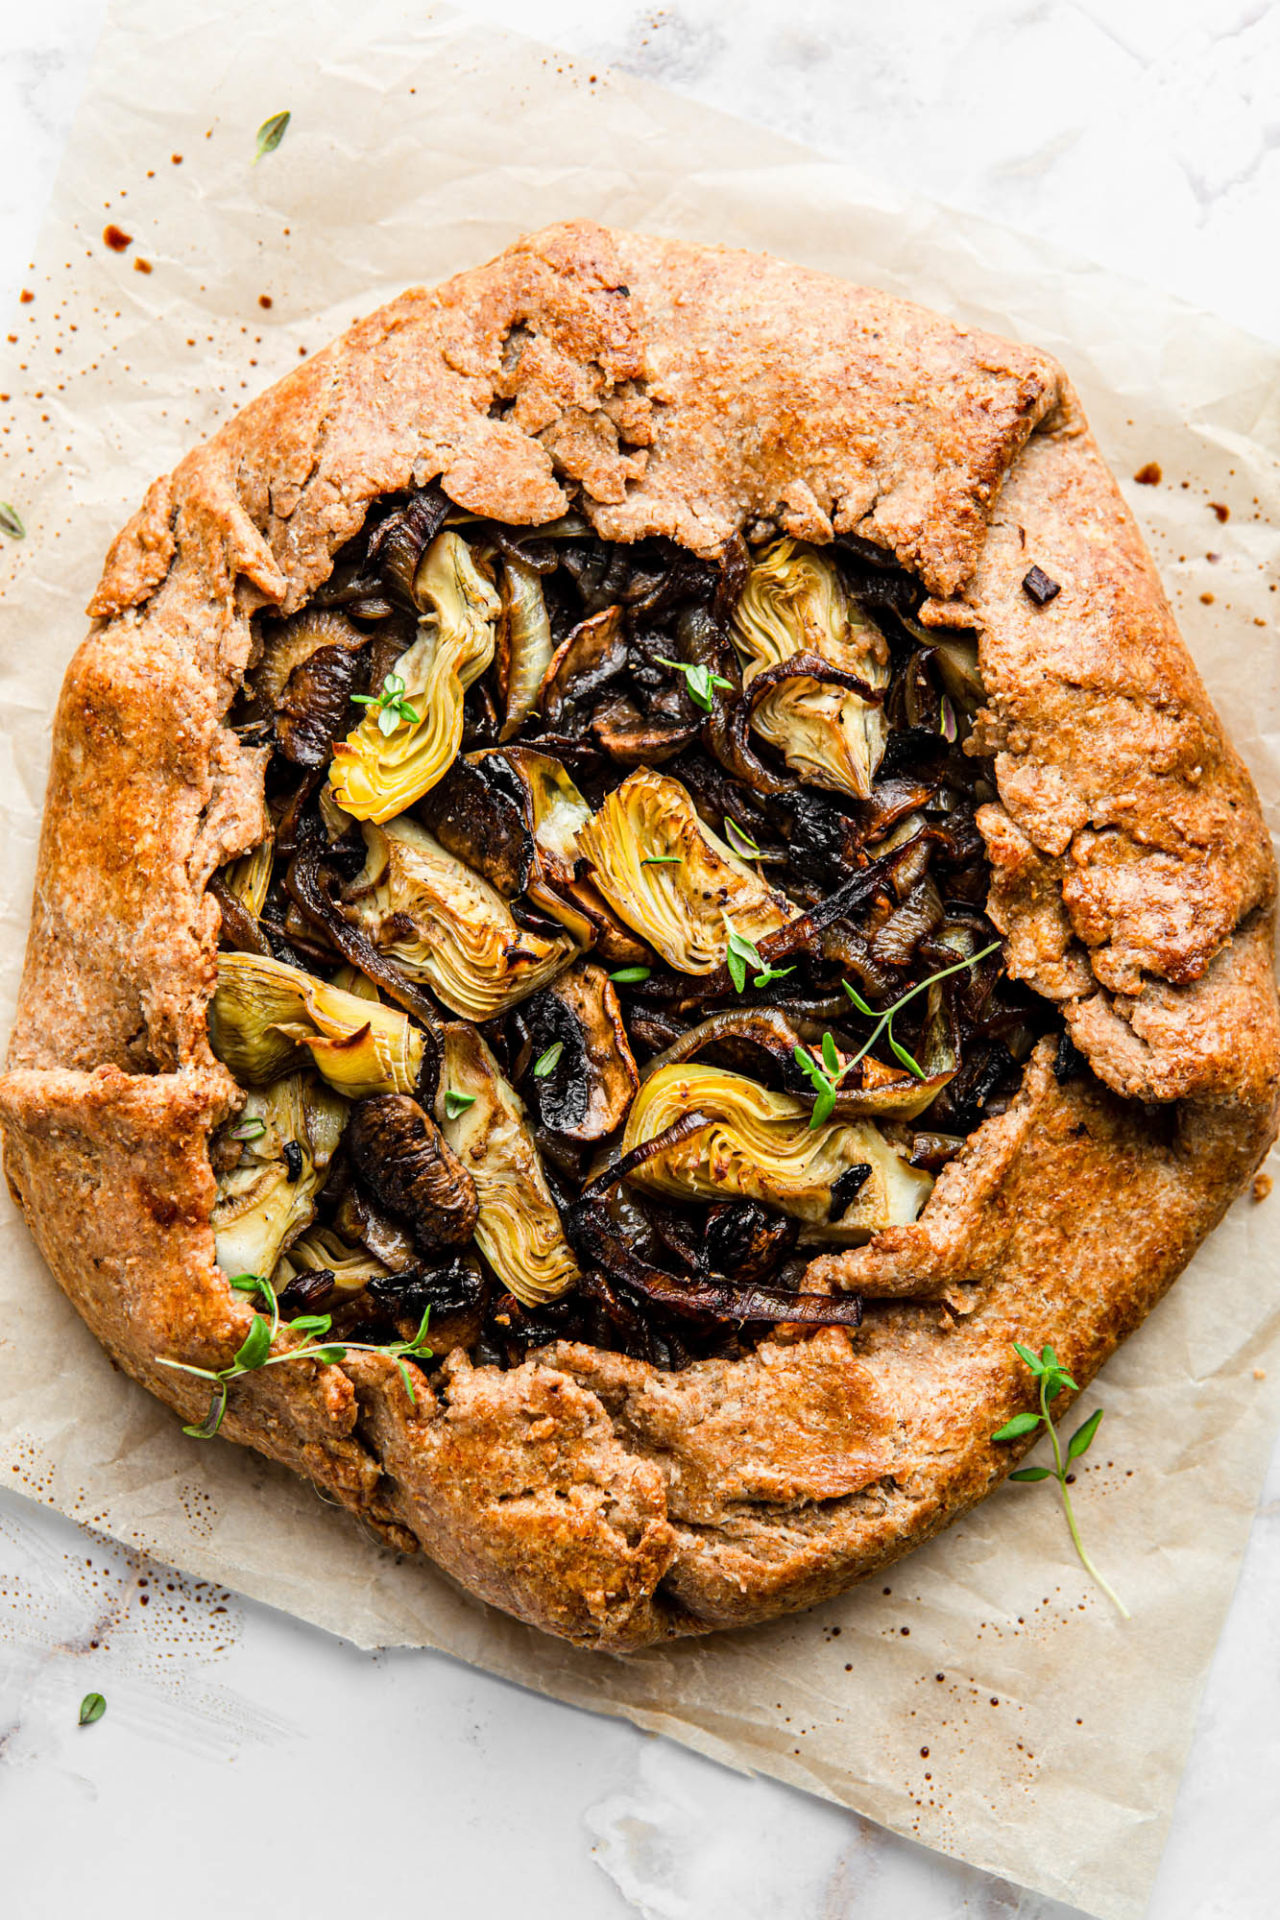 Savory Mushroom Galette with Artichokes and thyme